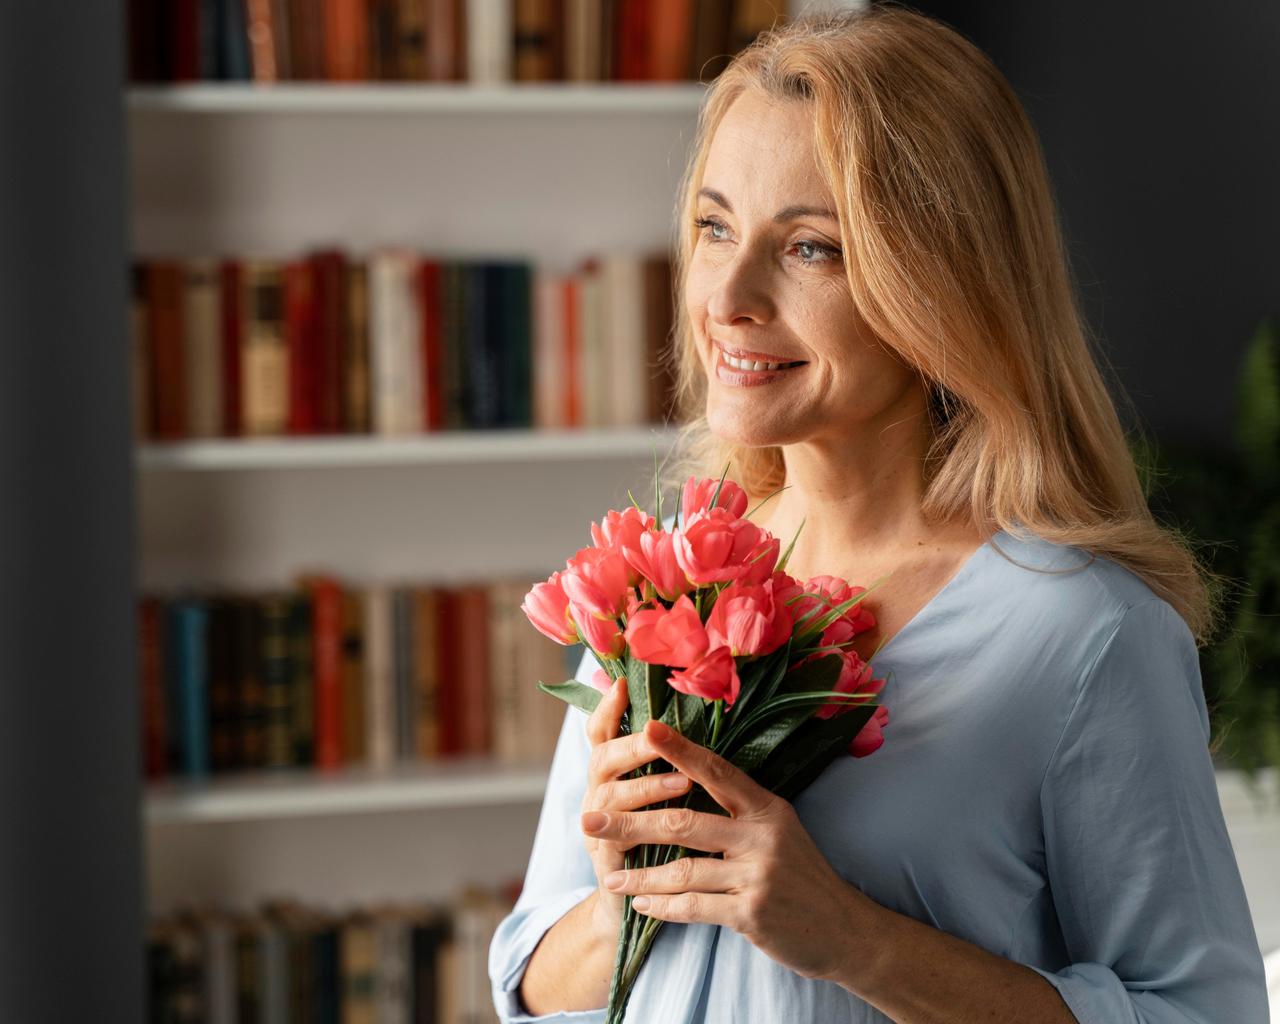 Smiling woman holding flowers.